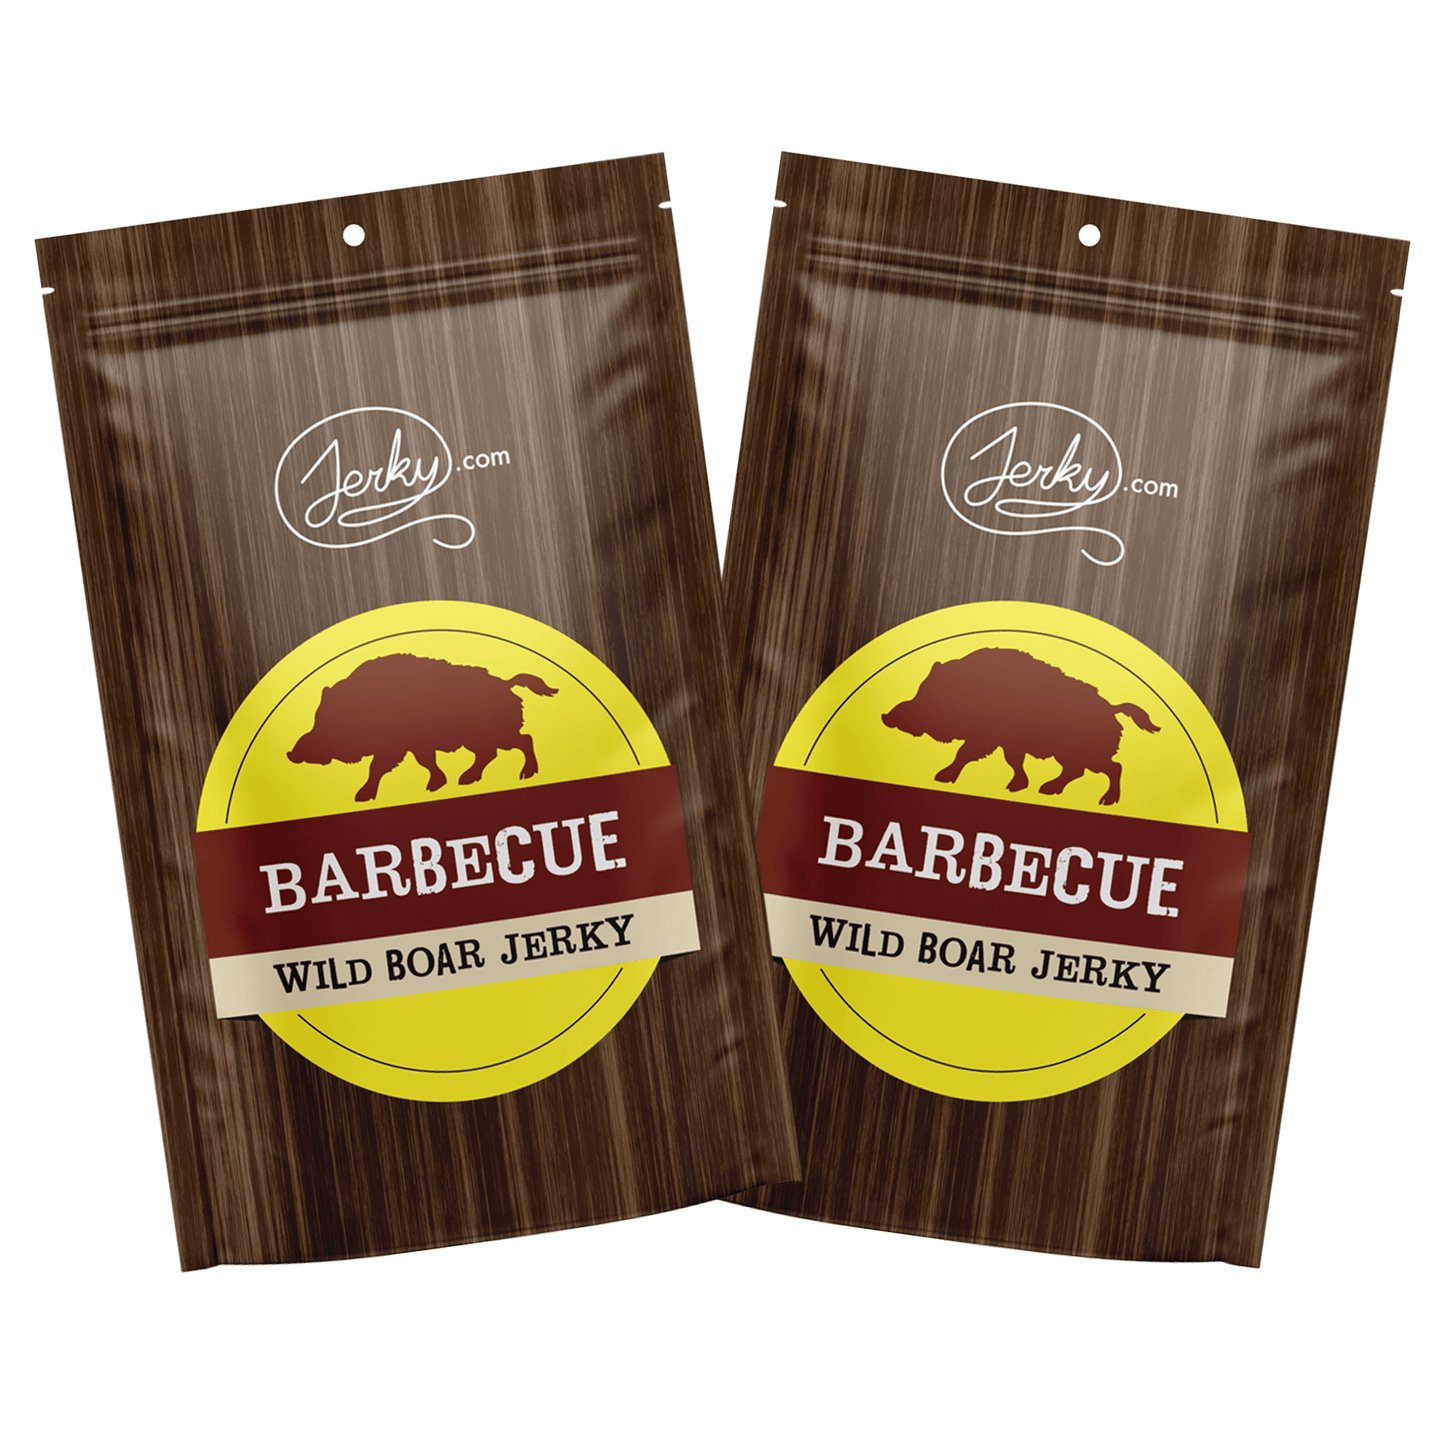 All-Natural Wild Boar Jerky - Barbecue by Jerky.com